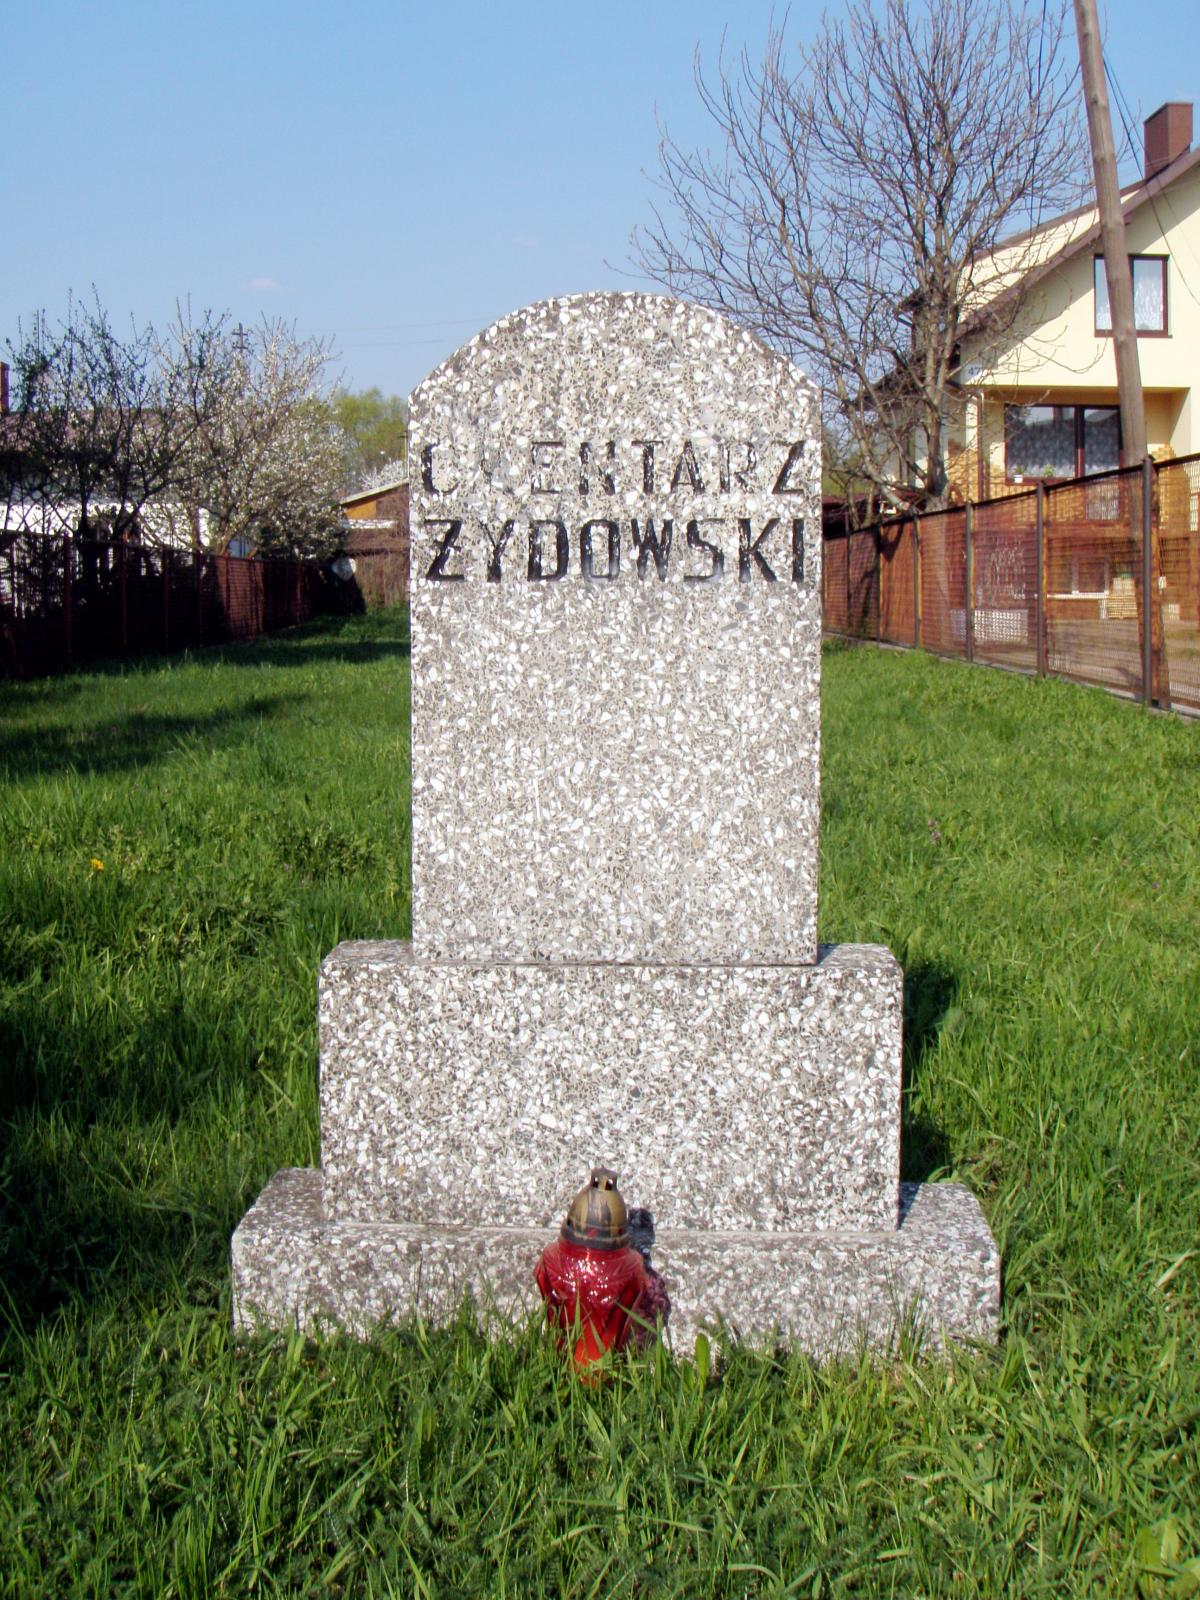 Wikipedia, Jewish victims cemetery in Augustw, Self-published work